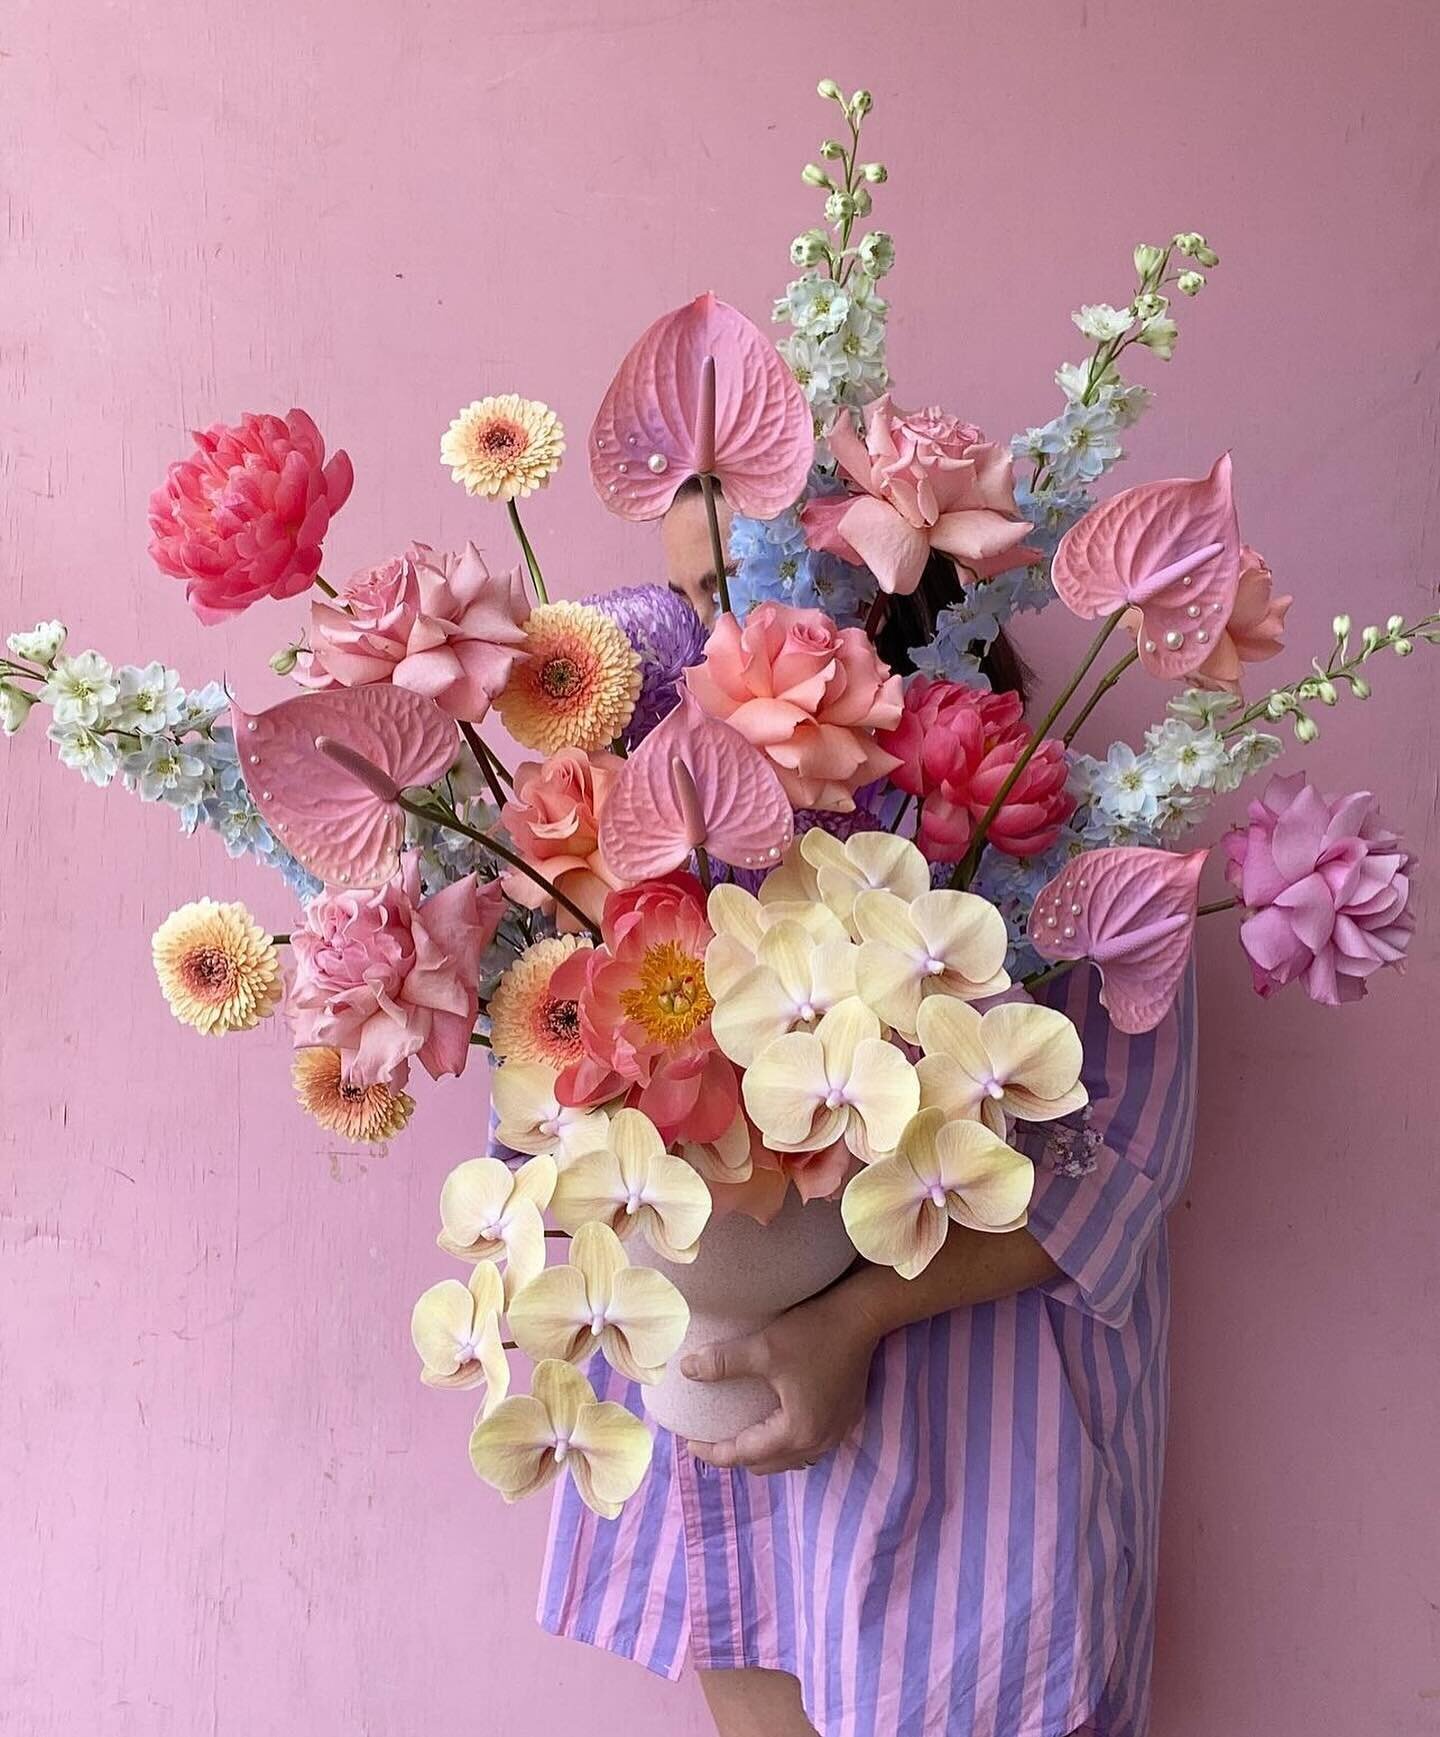 🧡🌸💐

via @sonny_and_willow